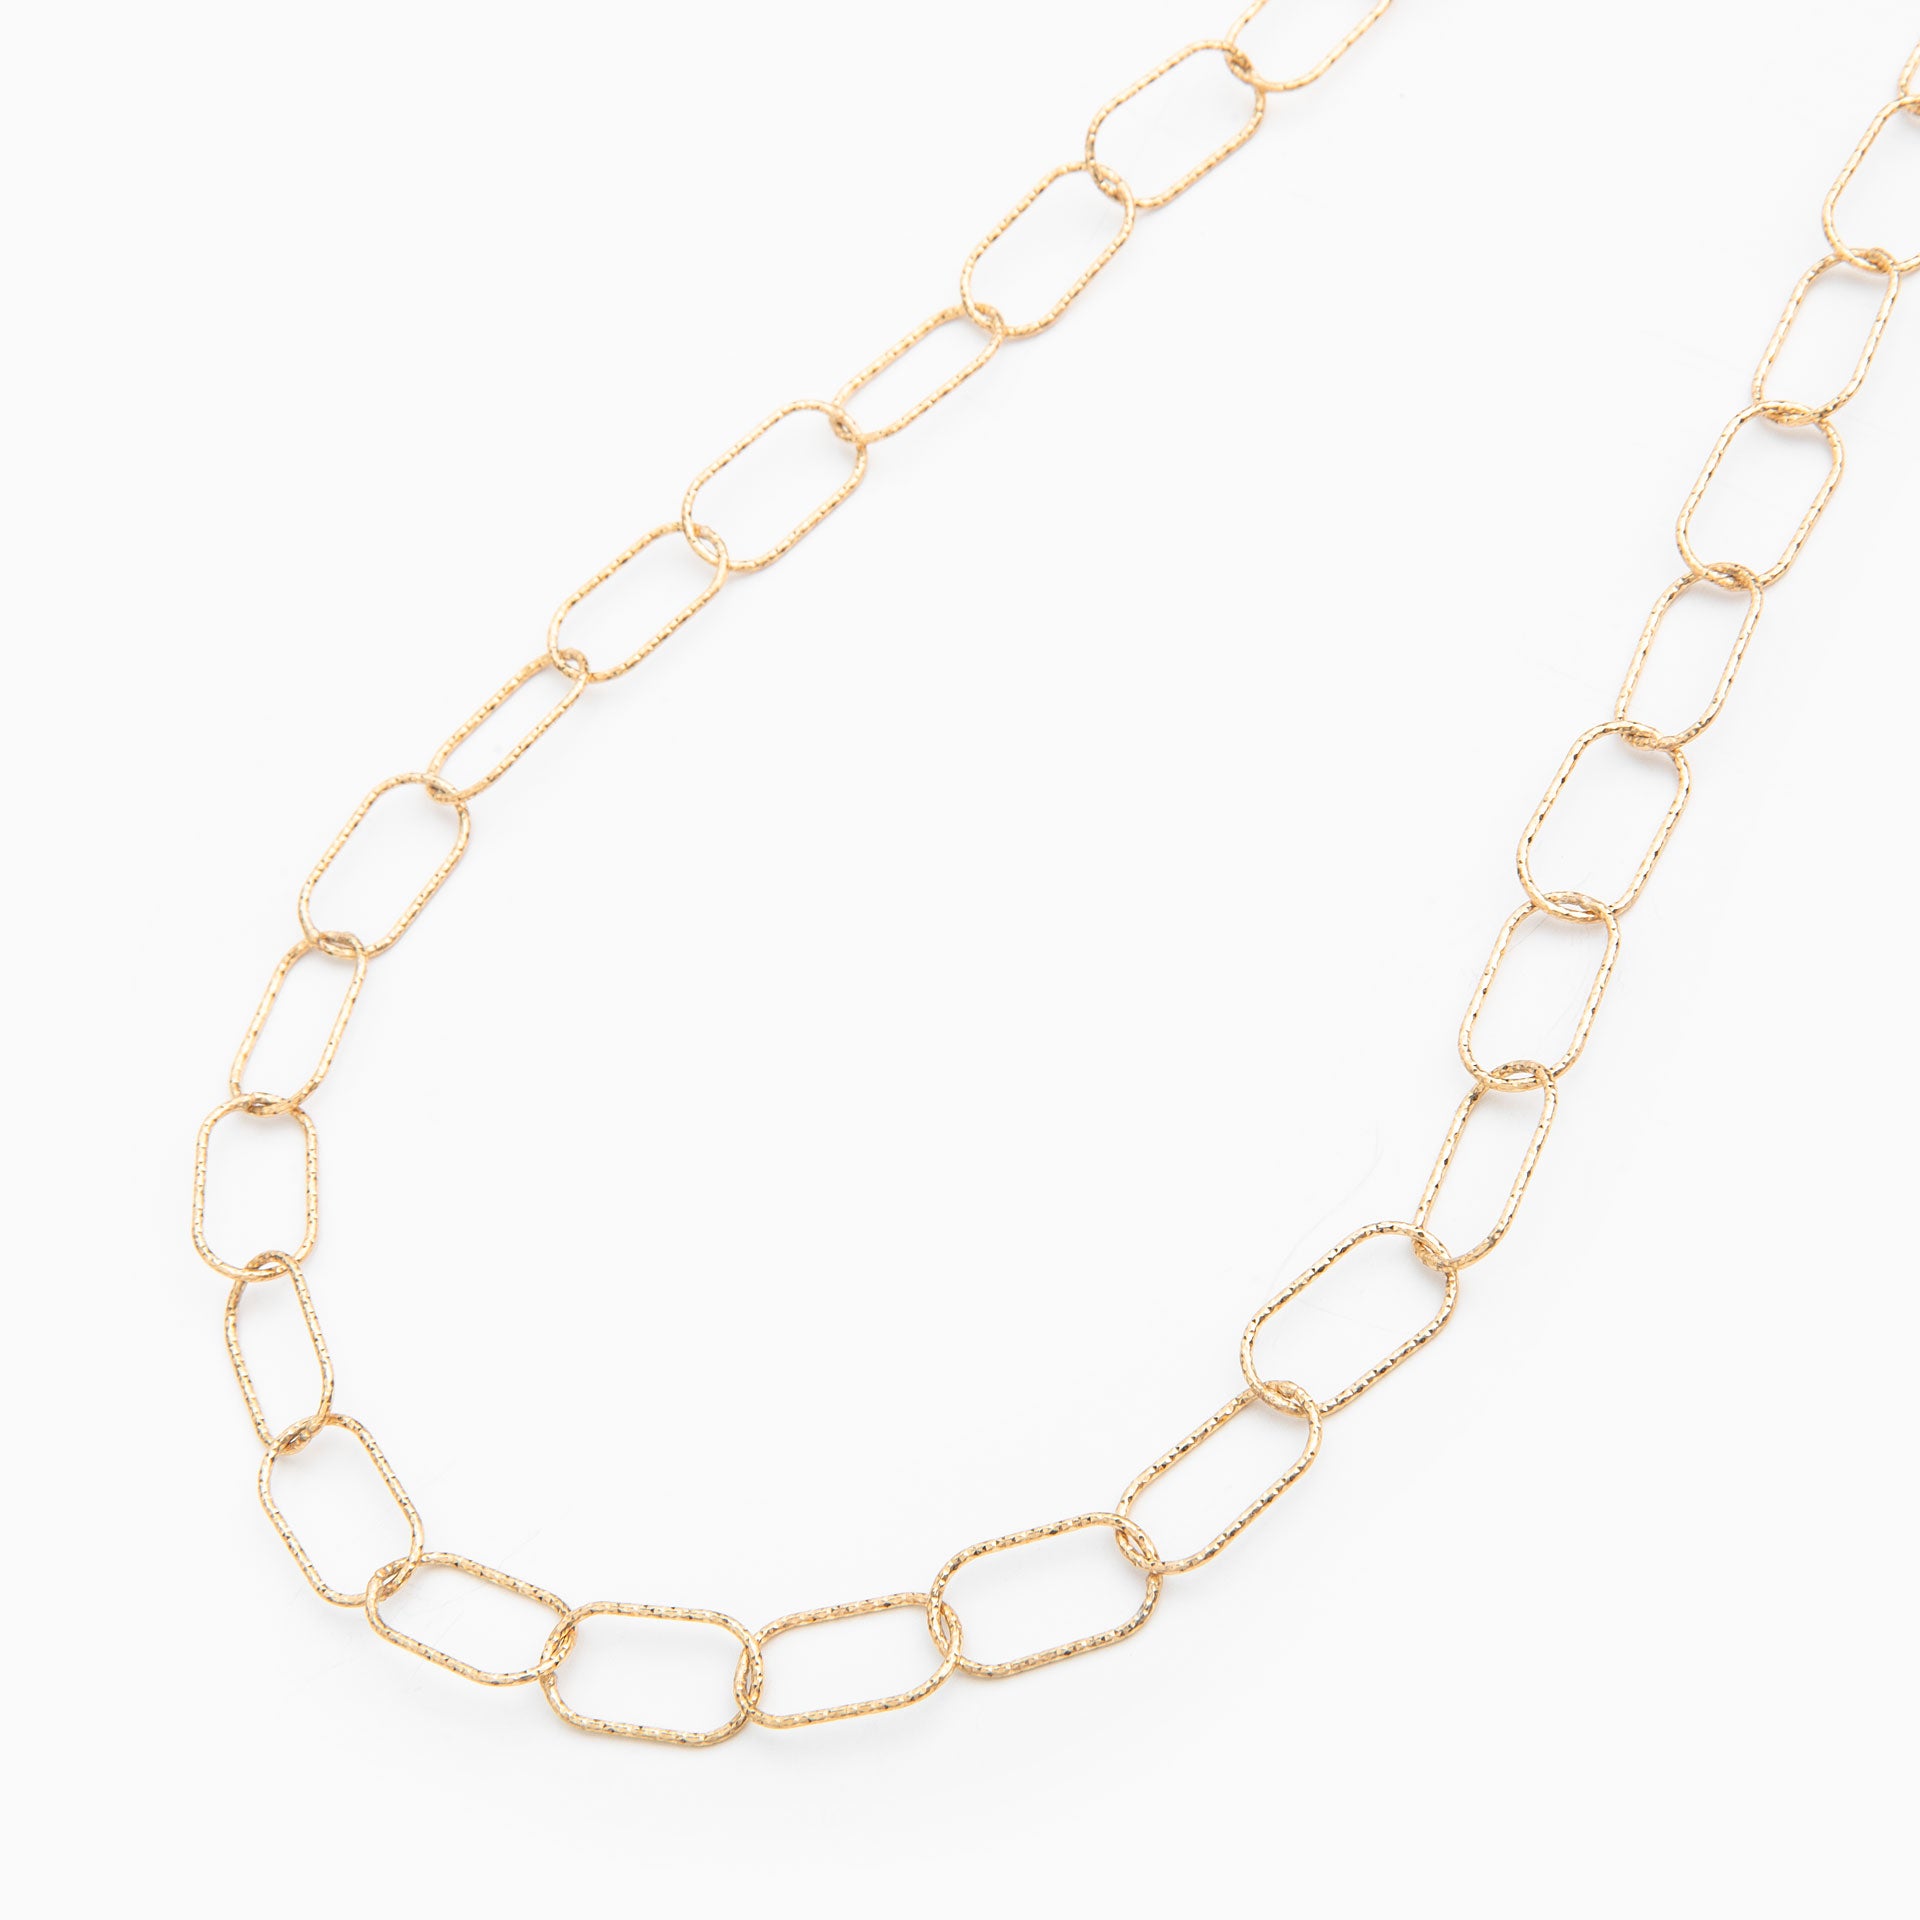 Paloma Necklace Silver 925° by Pearl Martini